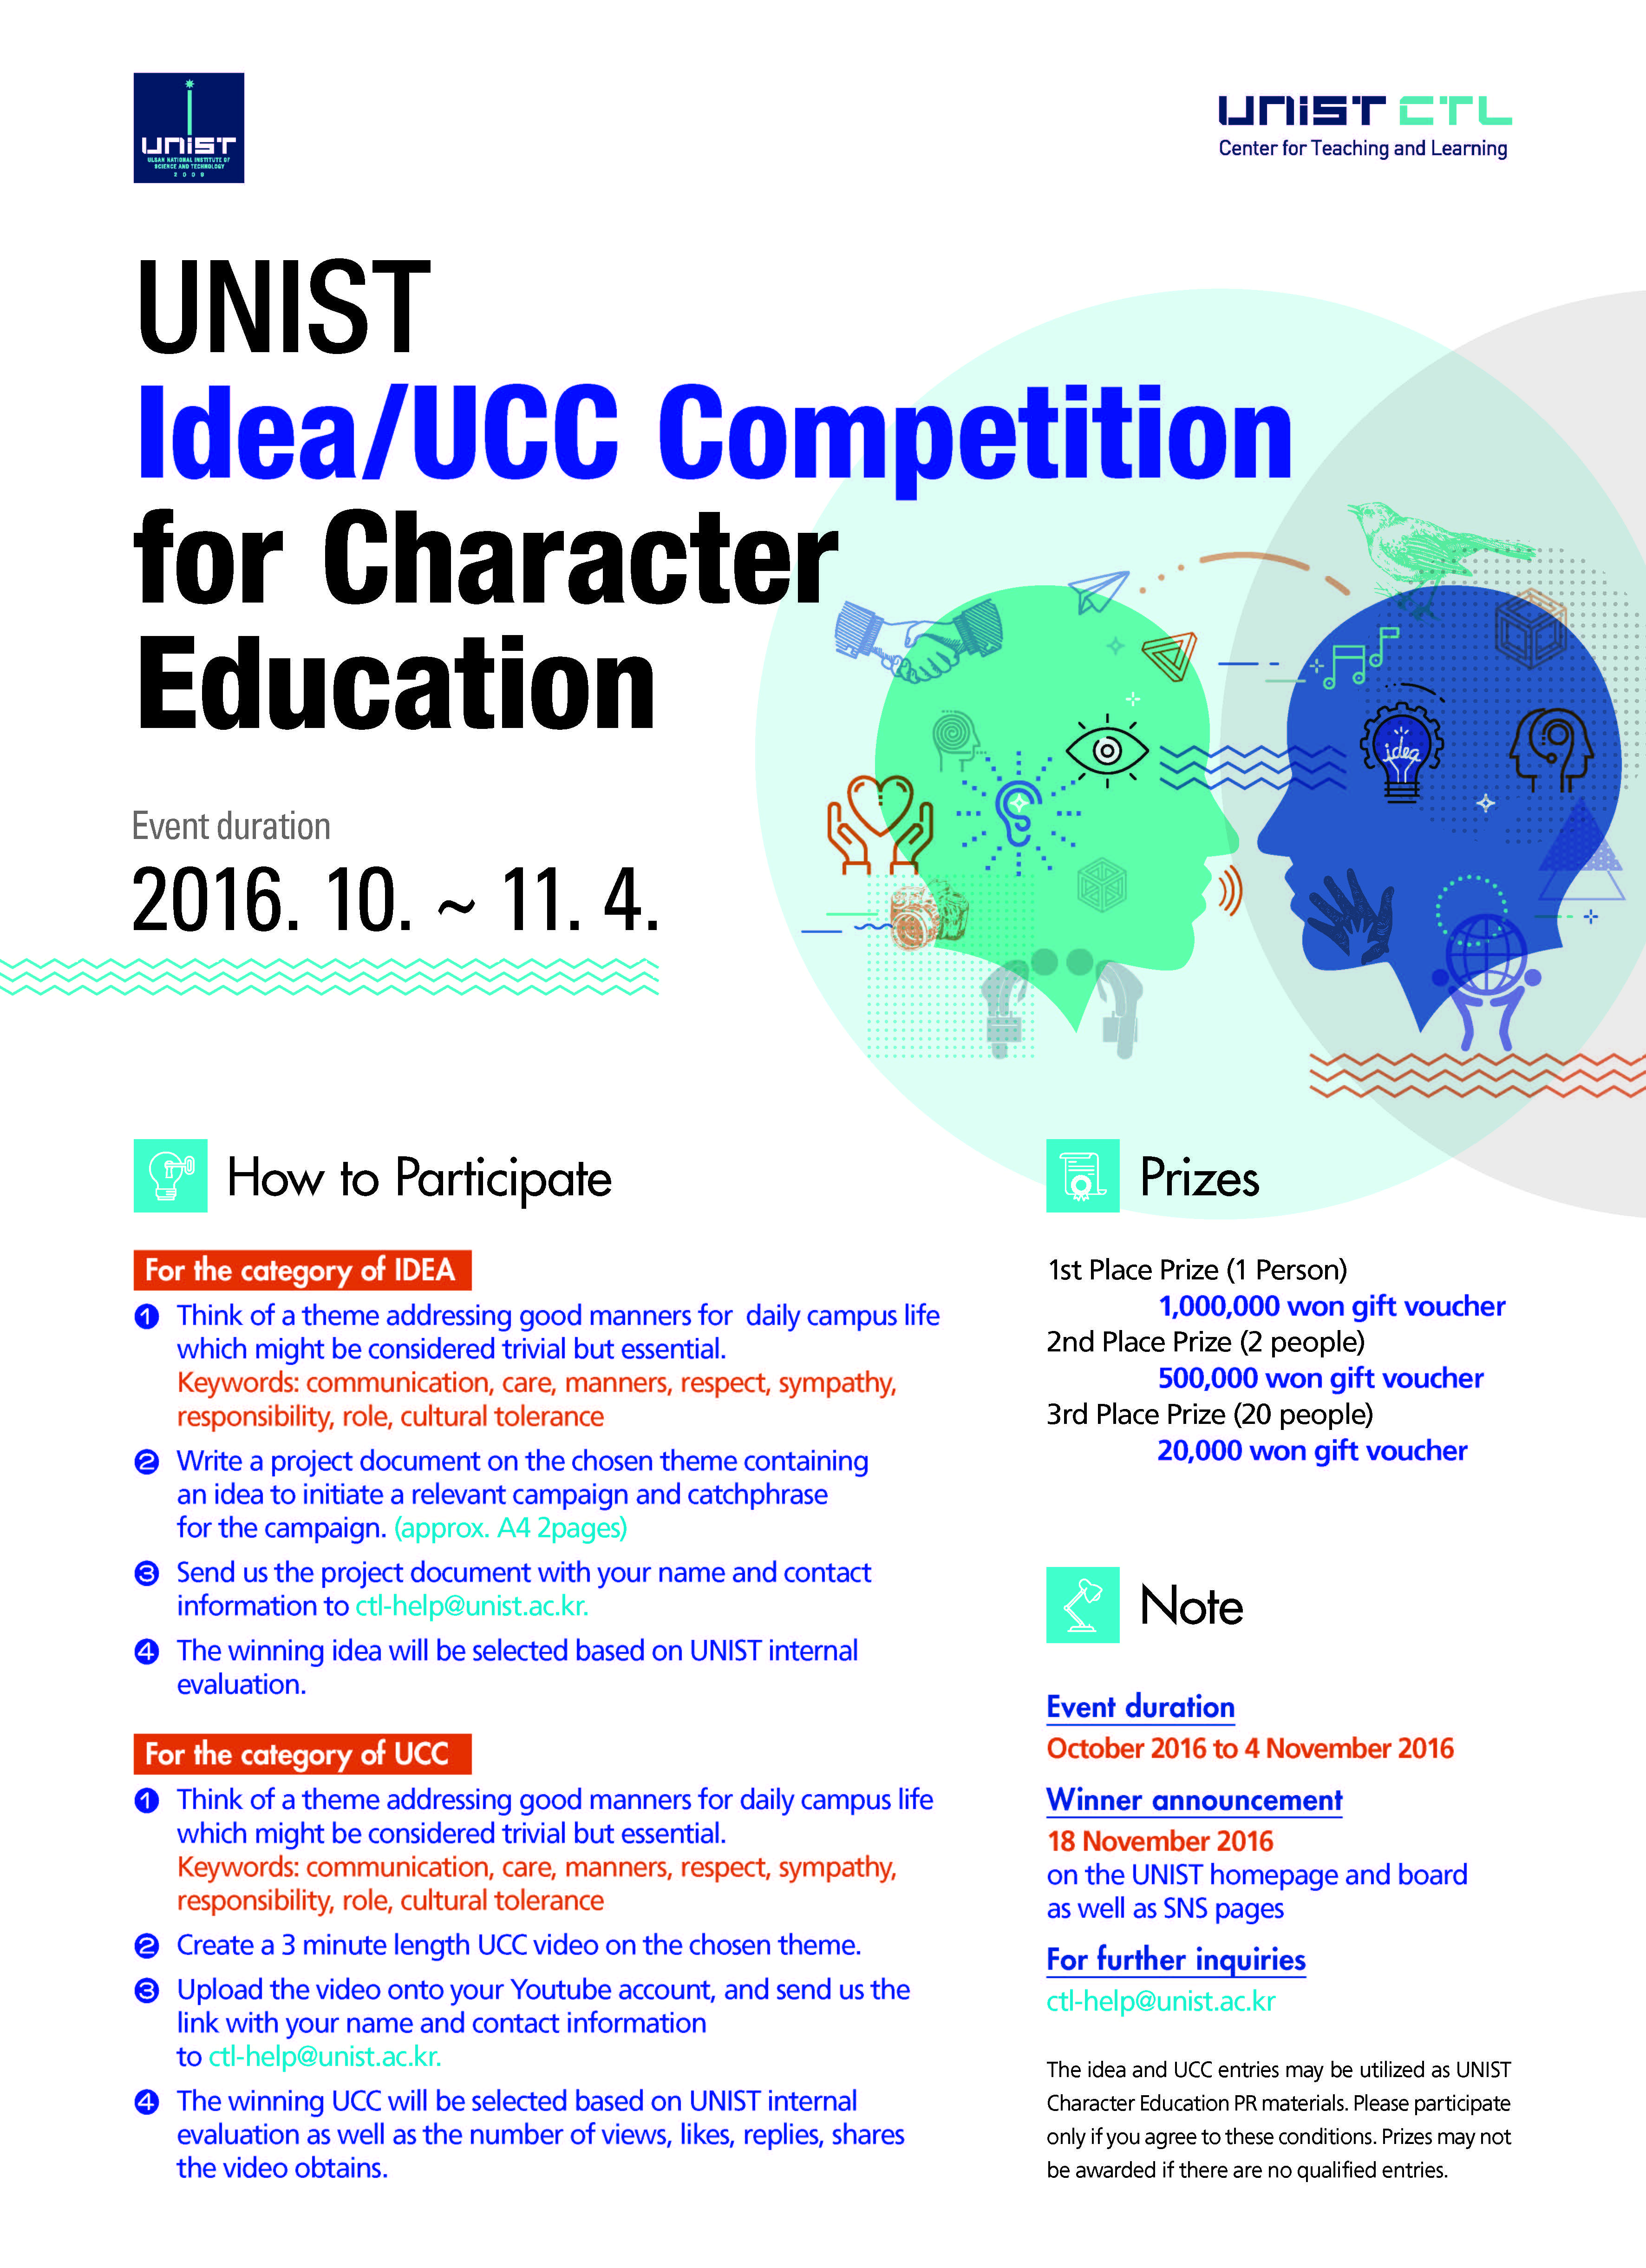 UNIST Idea/UCC Competition for Character Education